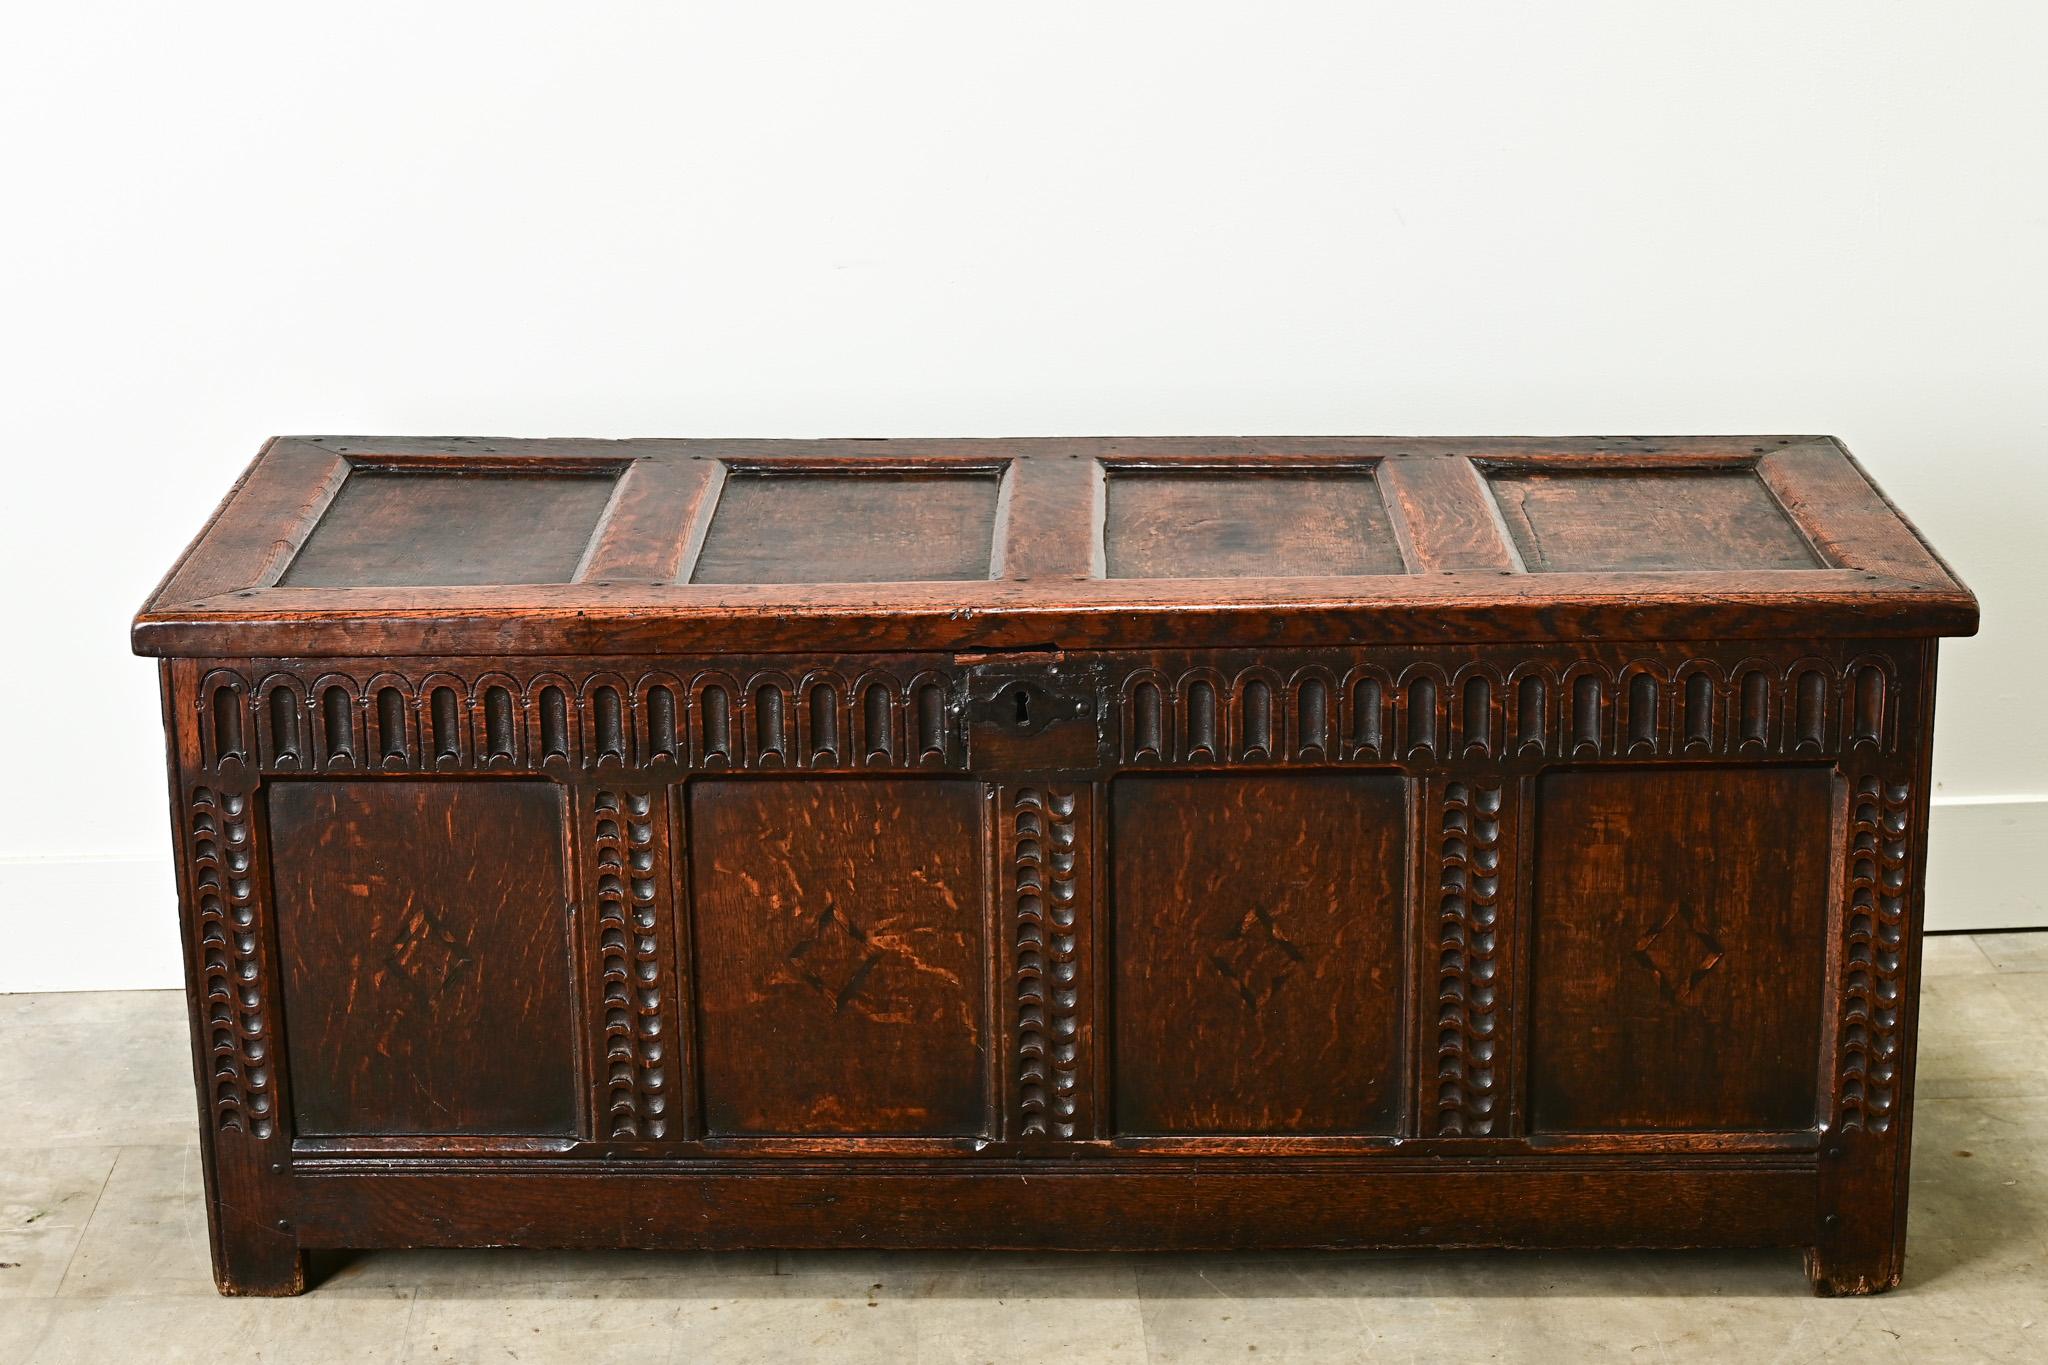 This Dutch solid oak paneled coffer is from the 1800’s. You’ll find carved designs on the exterior with inlay diamond shapes on the front. The sturdy trunk opens on hand forged iron hinges to a wide open interior. Cleaned and polished with a paste